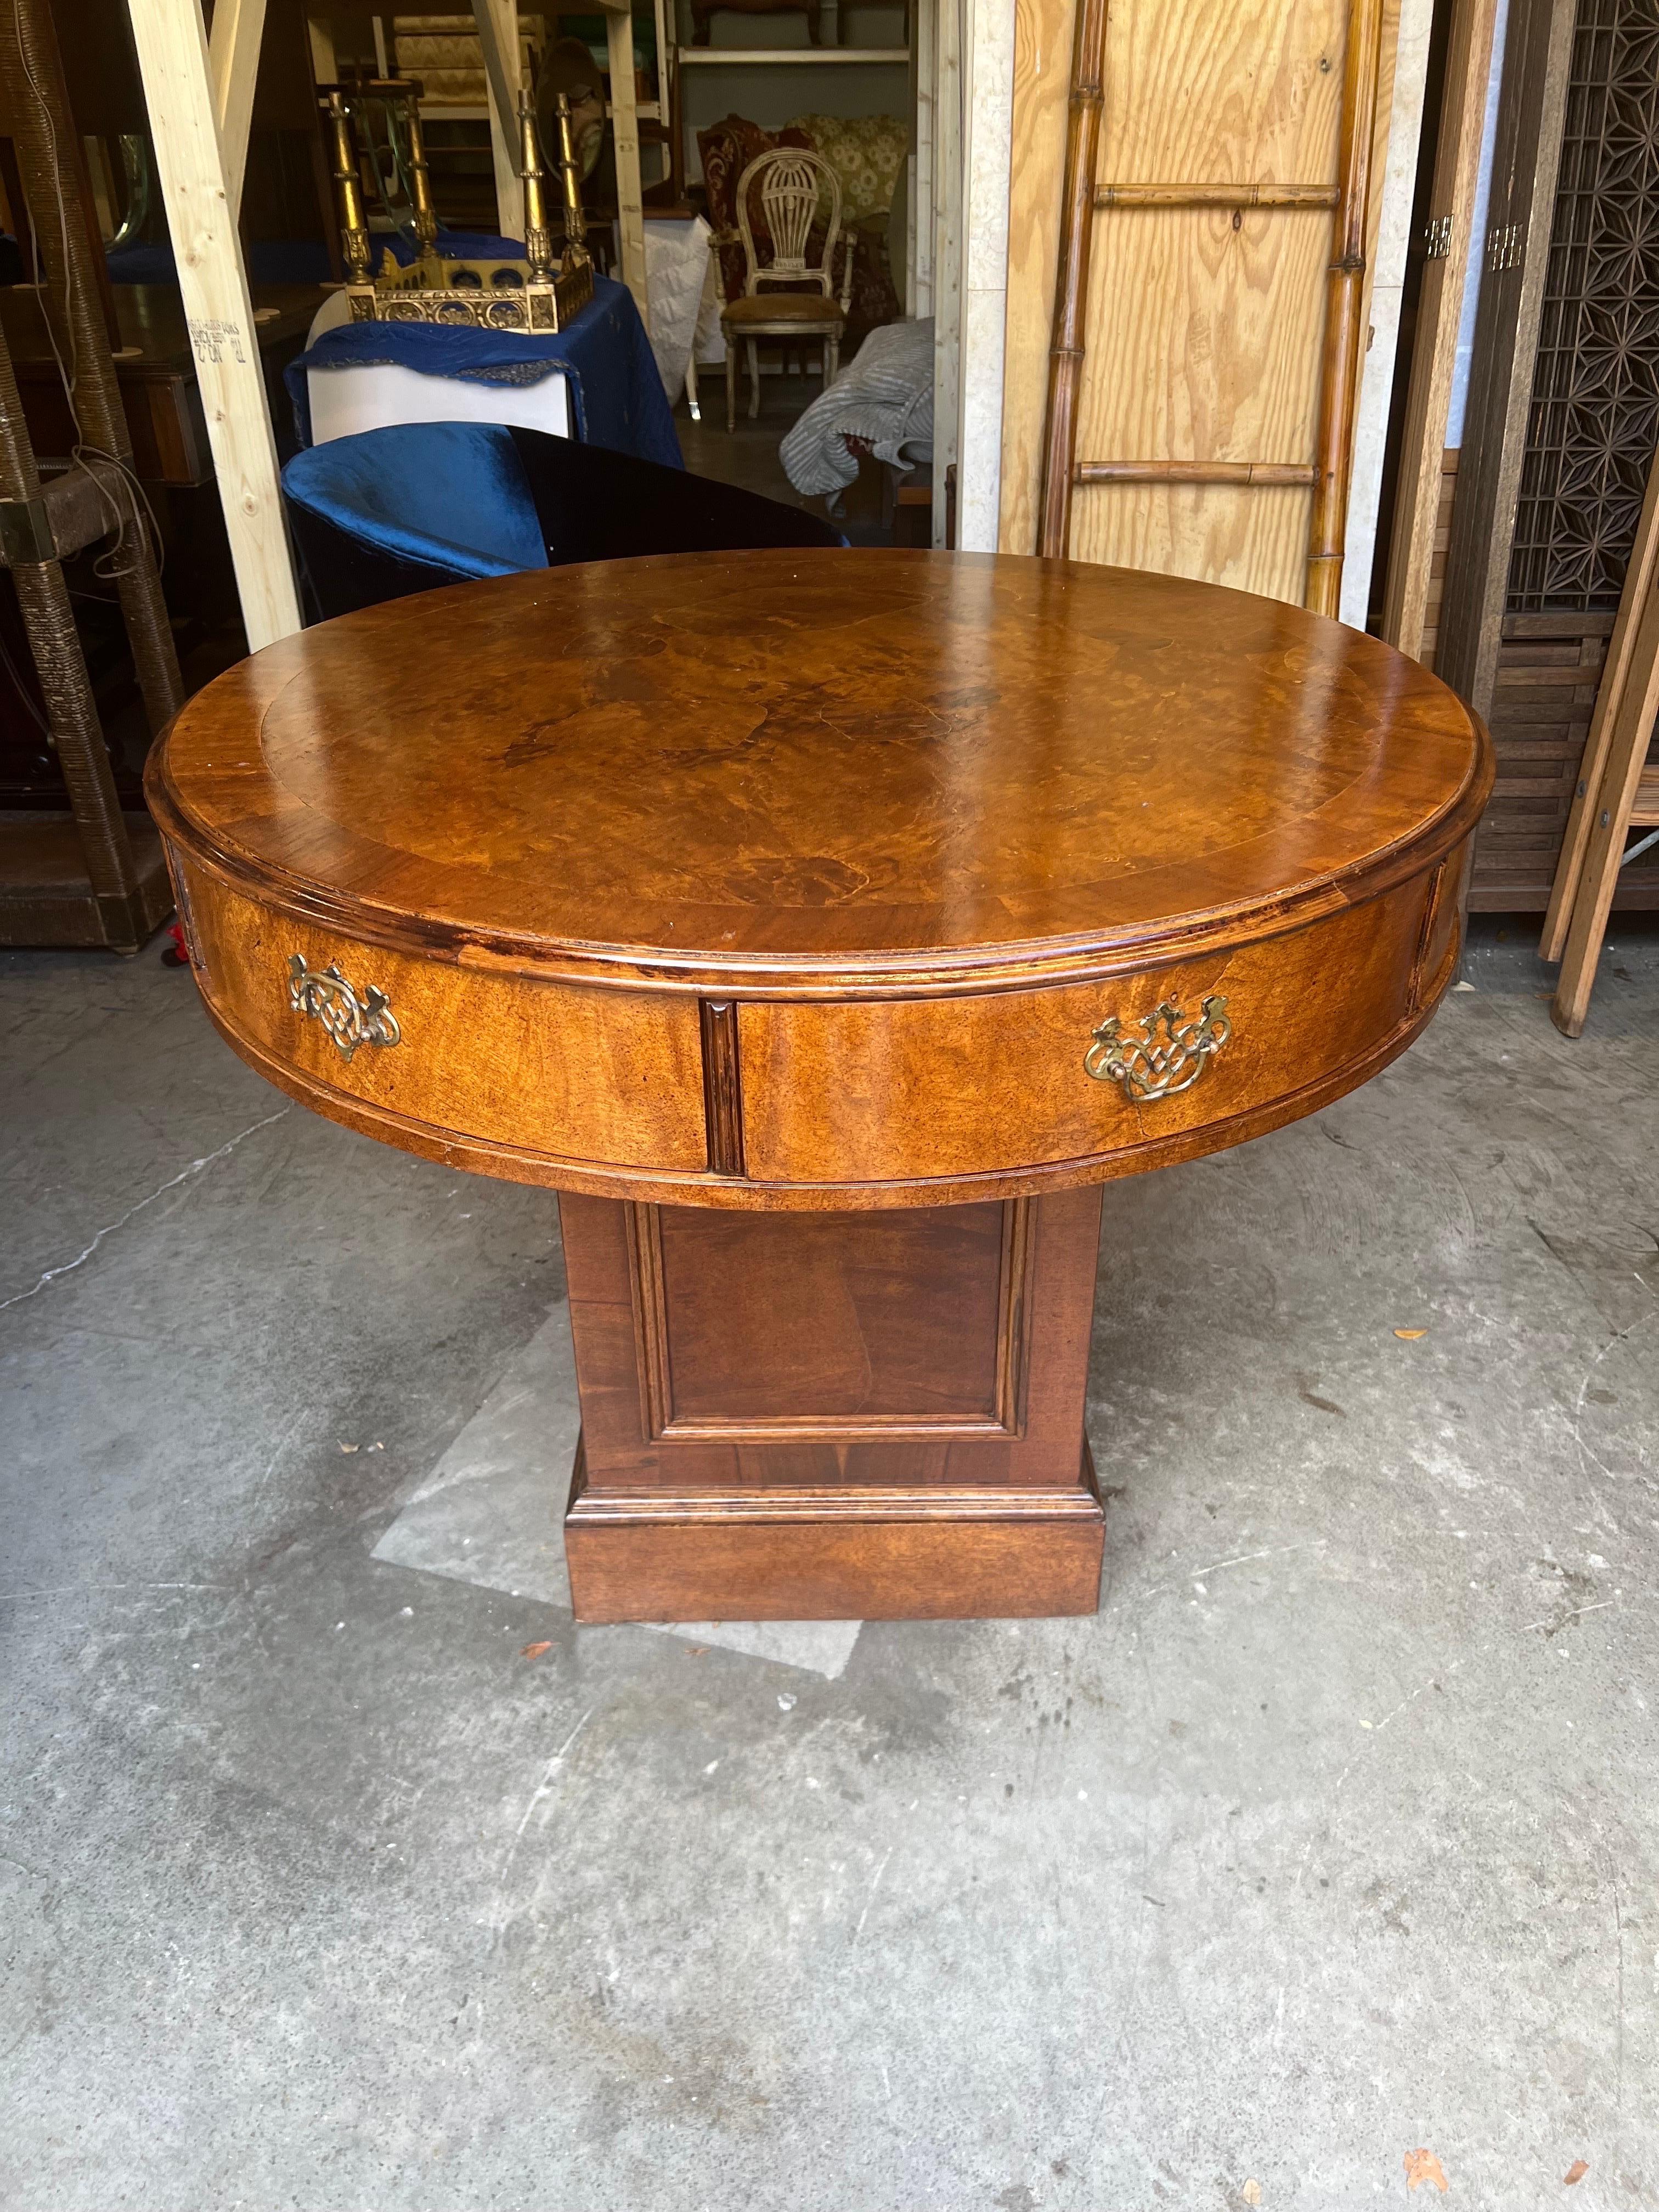 Early 20th century english Burled walnut and Burled mahogany center table.   This beautiful top sits on a single pedestal with four sides that have a nicely grained Burled mahogany.  The top itself appears to be an English Burled walnut and it has 6